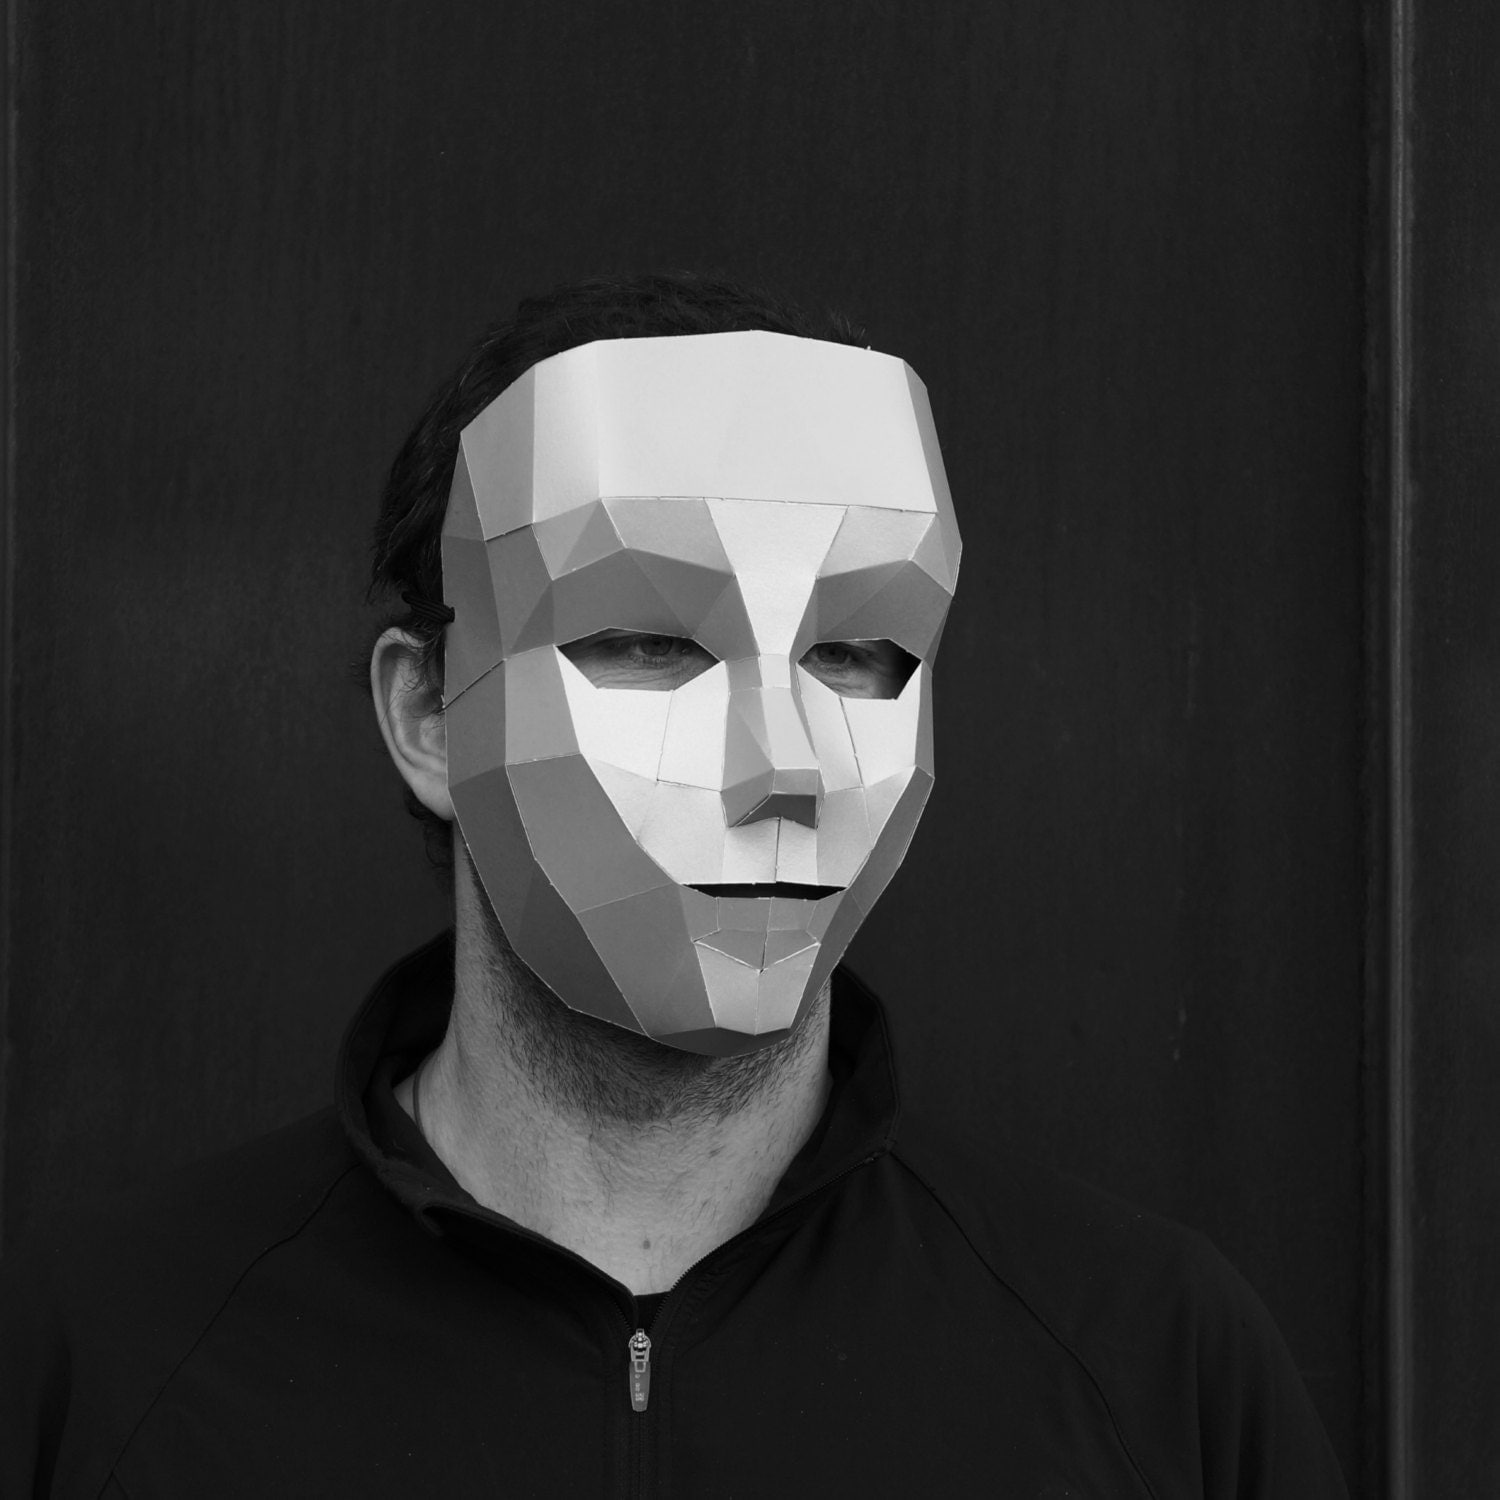 Boy Mask make your own card mask using this simple digital